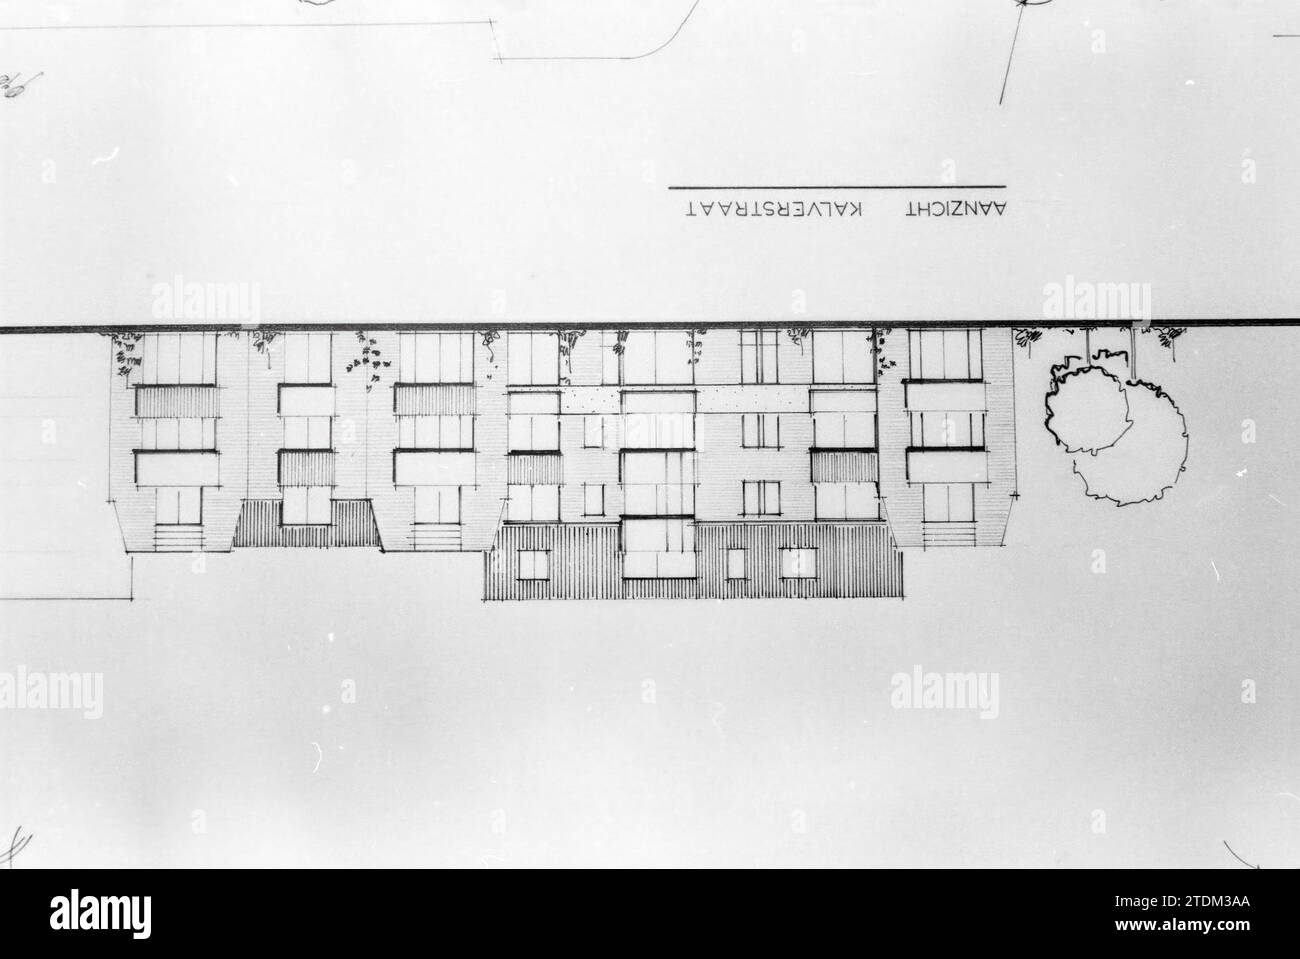 Design drawing of new construction complex Kalverstraat, 07-07-1979, Whizgle News from the Past, Tailored for the Future. Explore historical narratives, Dutch The Netherlands agency image with a modern perspective, bridging the gap between yesterday's events and tomorrow's insights. A timeless journey shaping the stories that shape our future Stock Photo